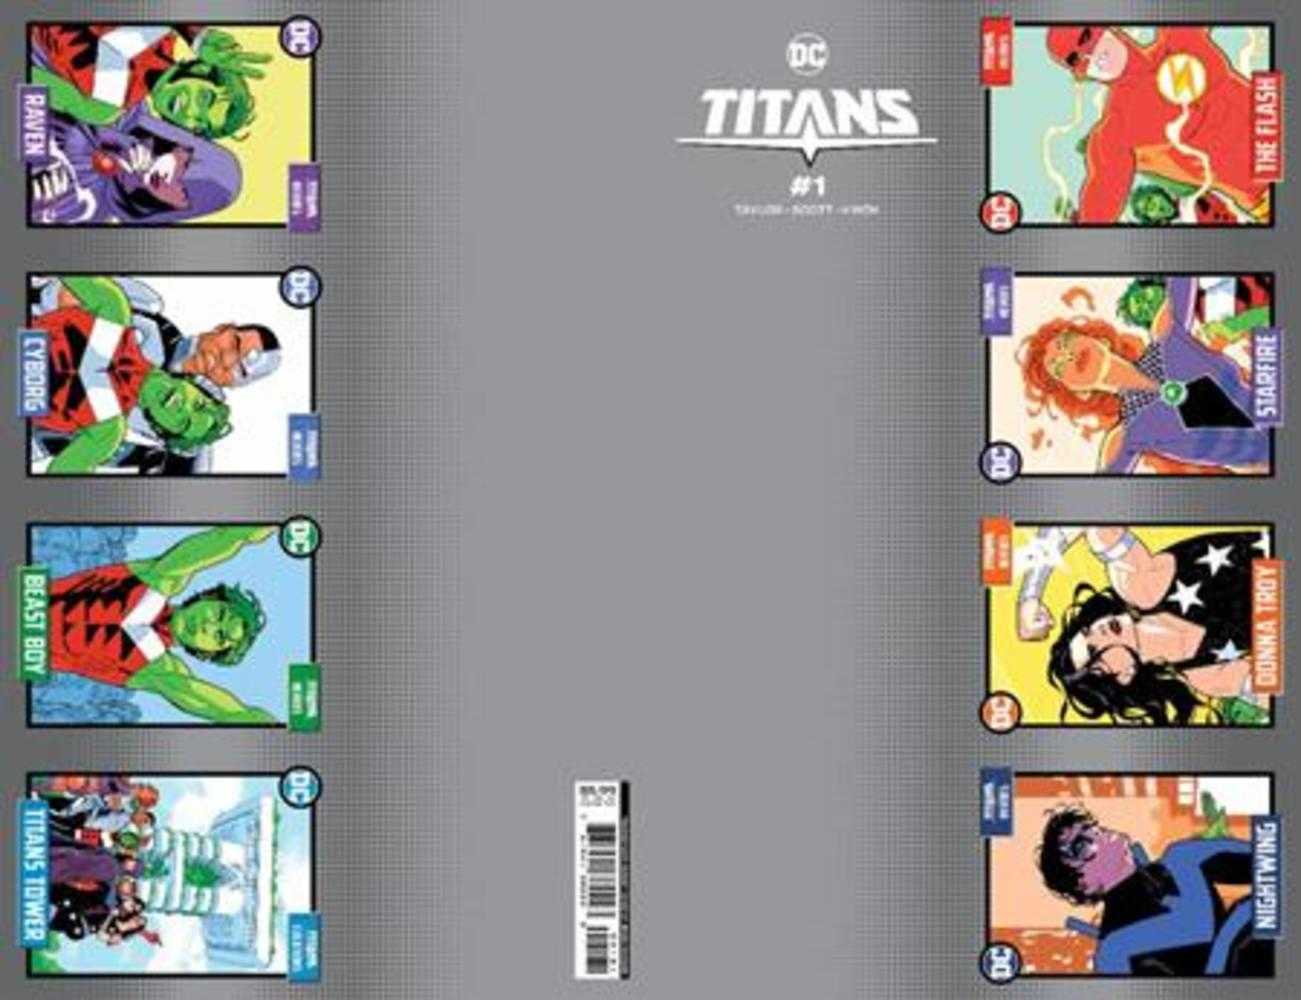 Titans #1 Cover H Perforation Trading Card Card Stock Variant - The Fourth Place